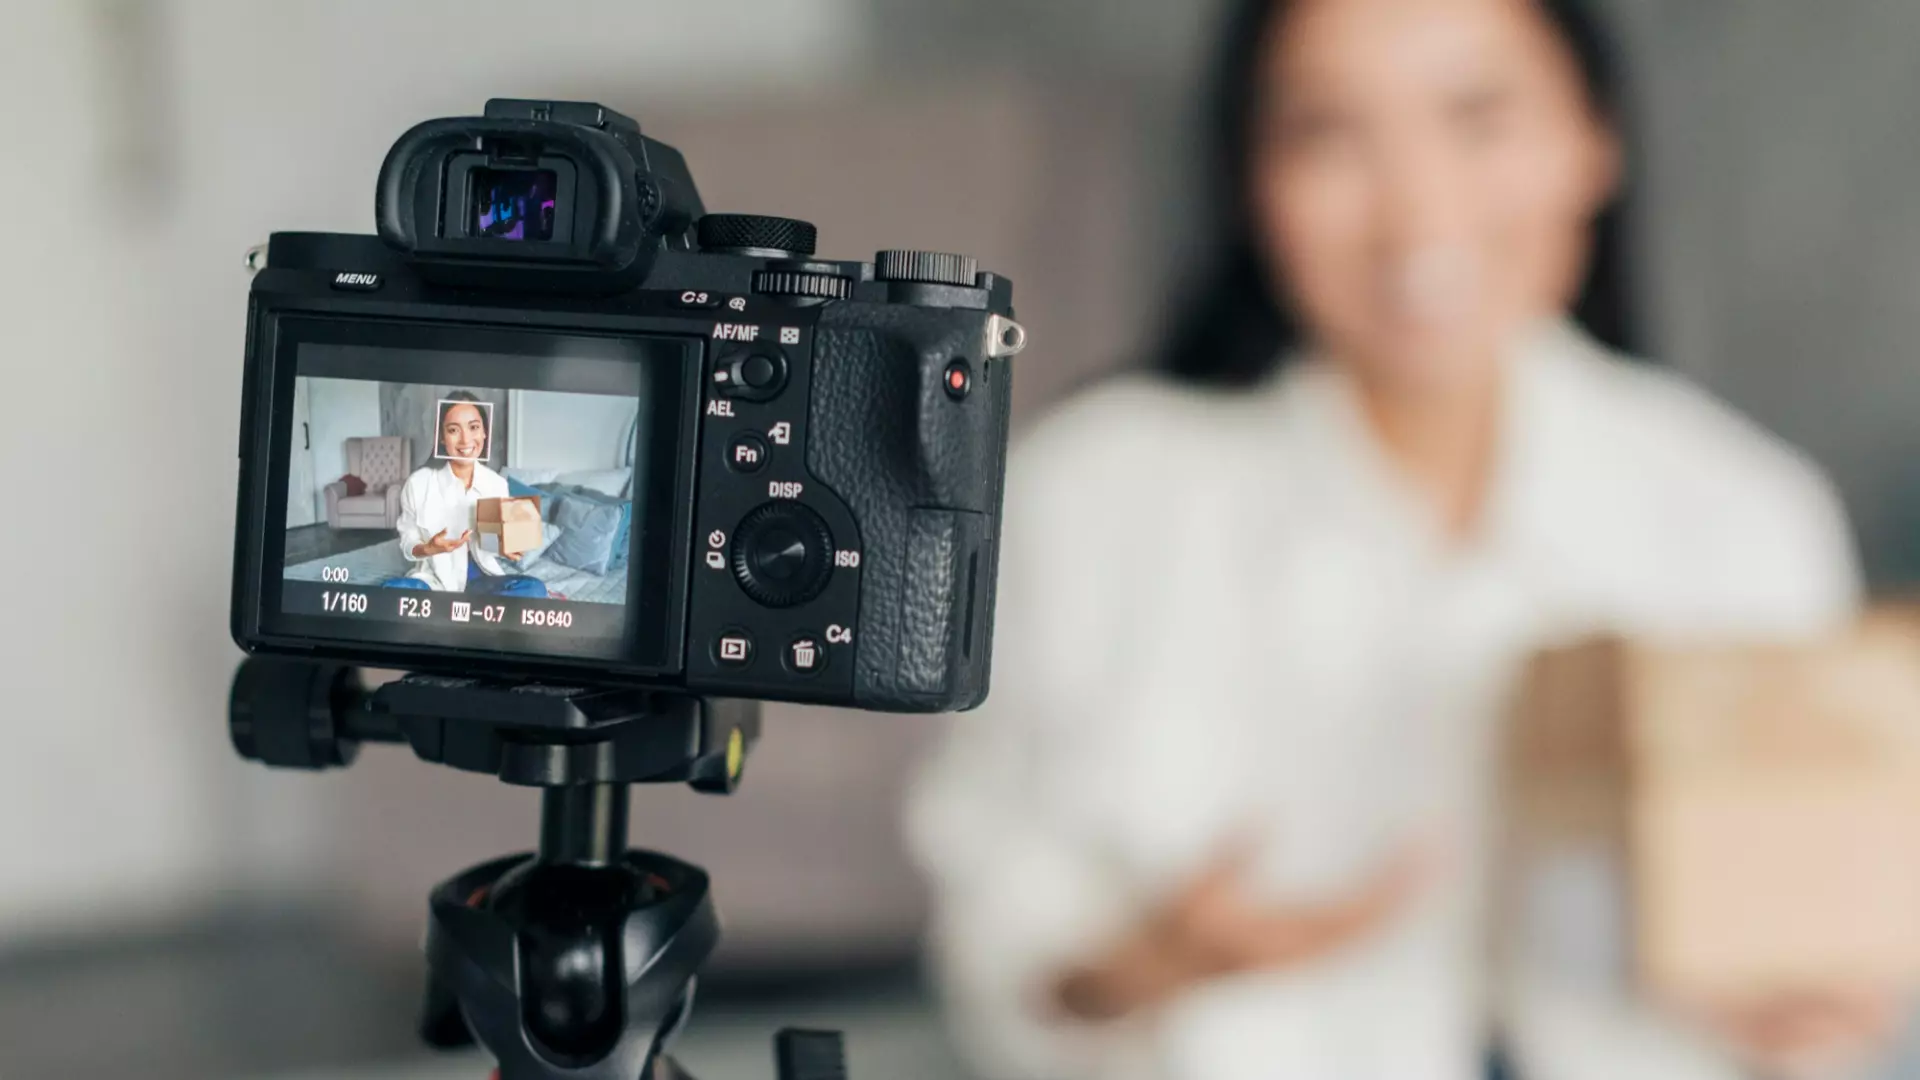 Increase Your Sales With Video Content